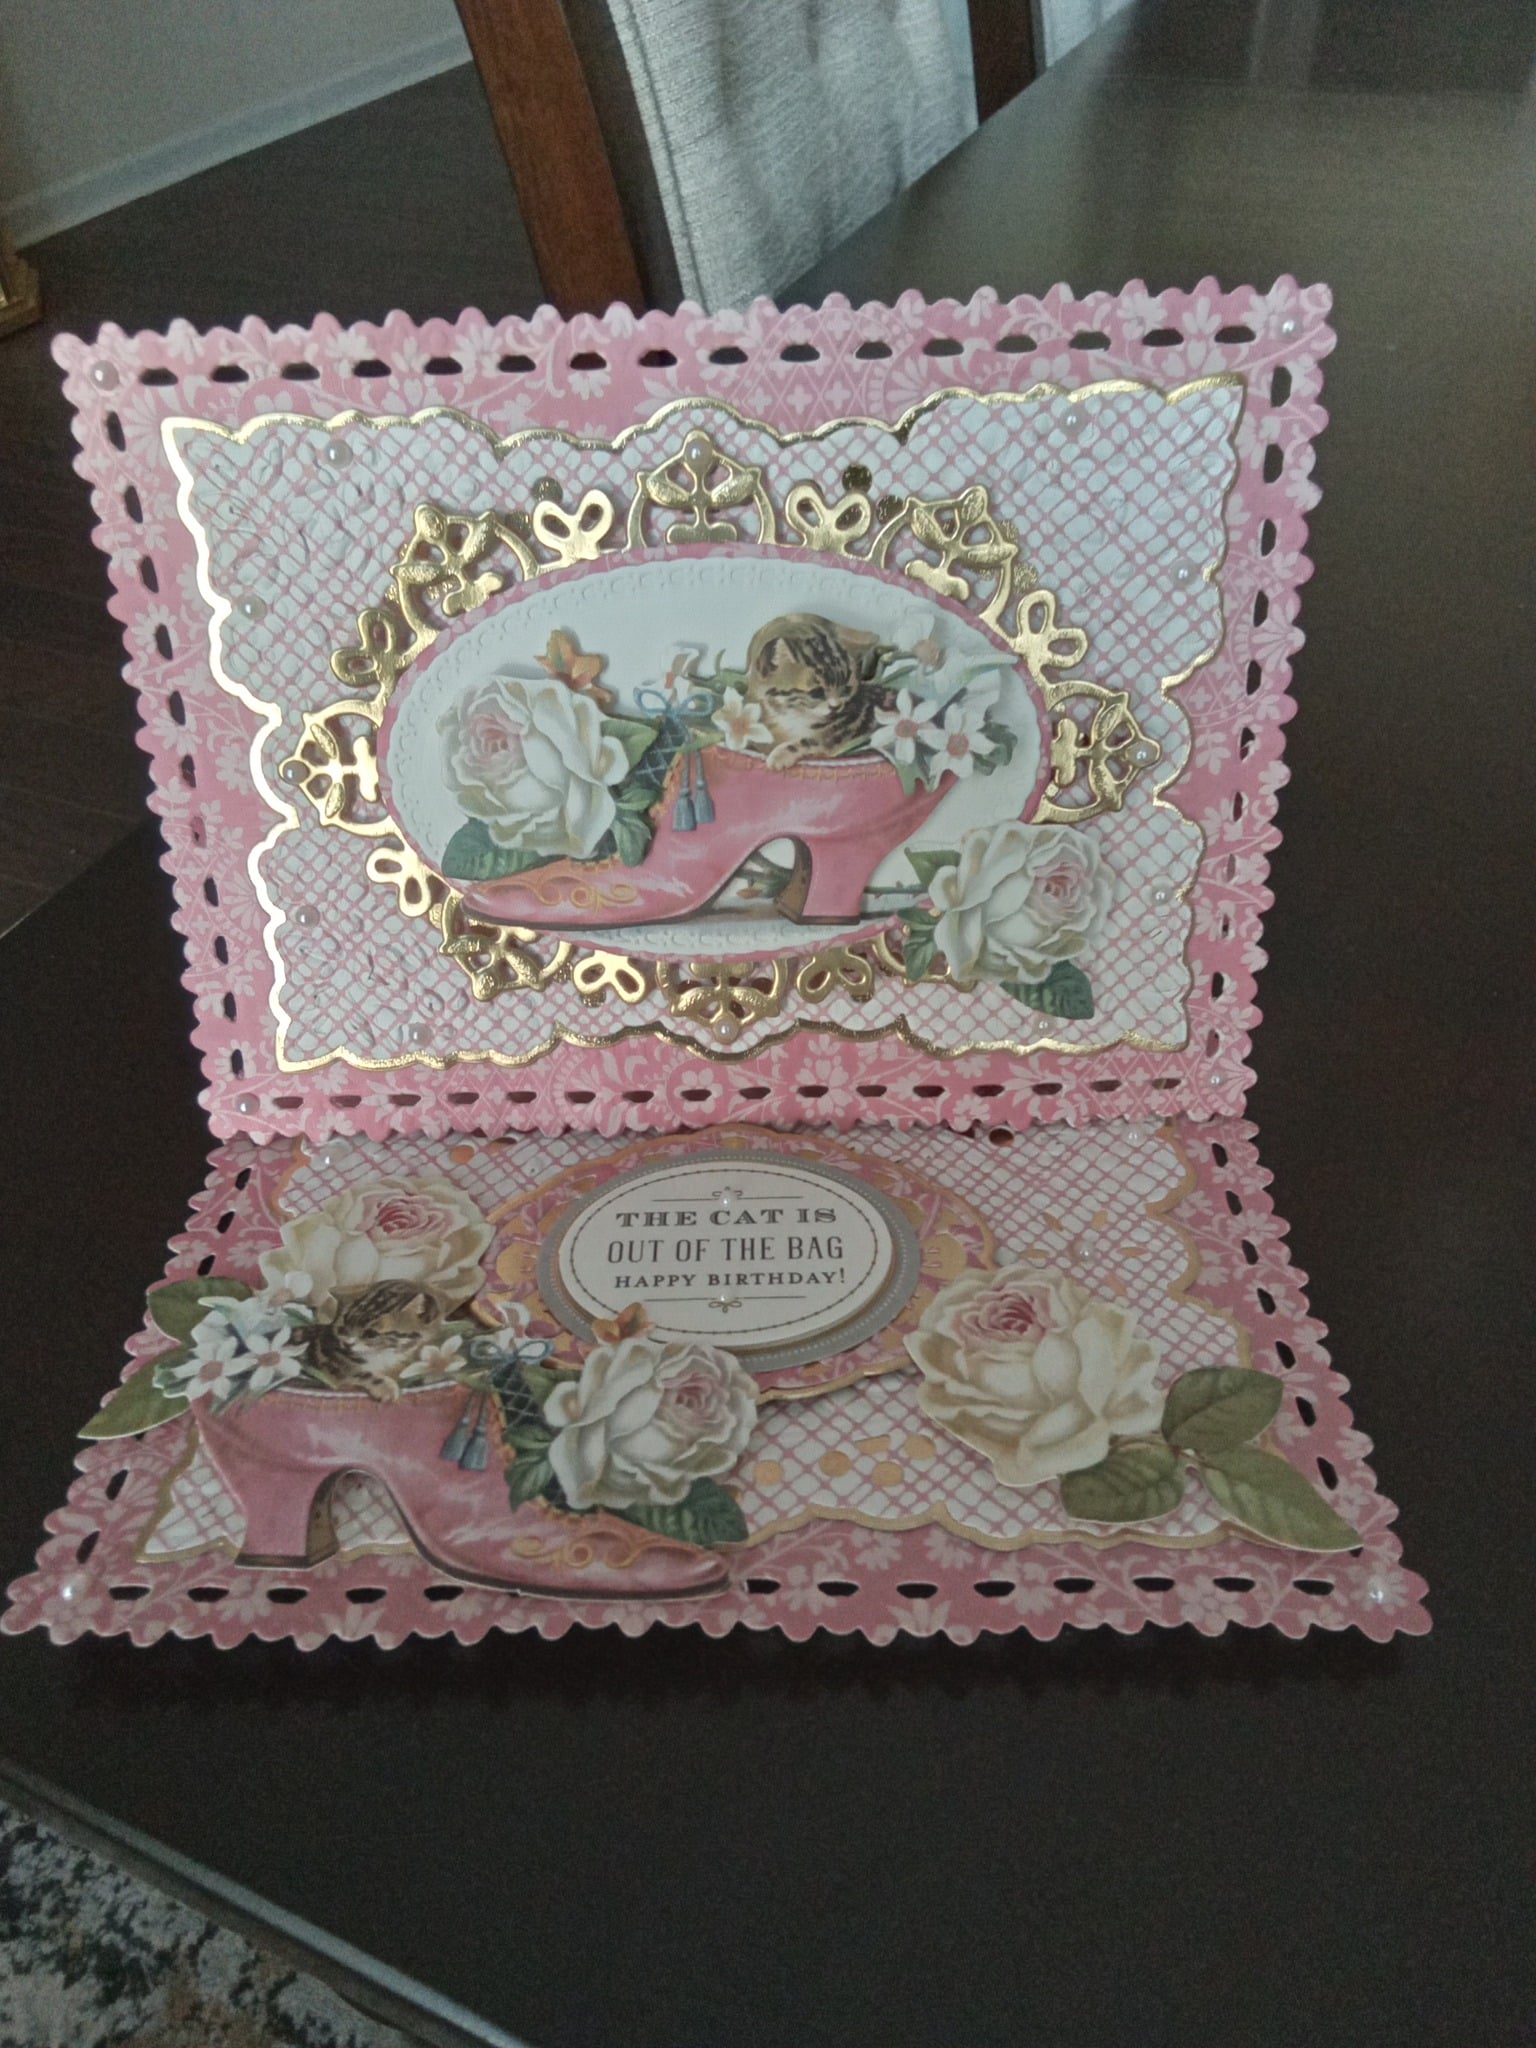 A pink and gold card with a cat and flowers.